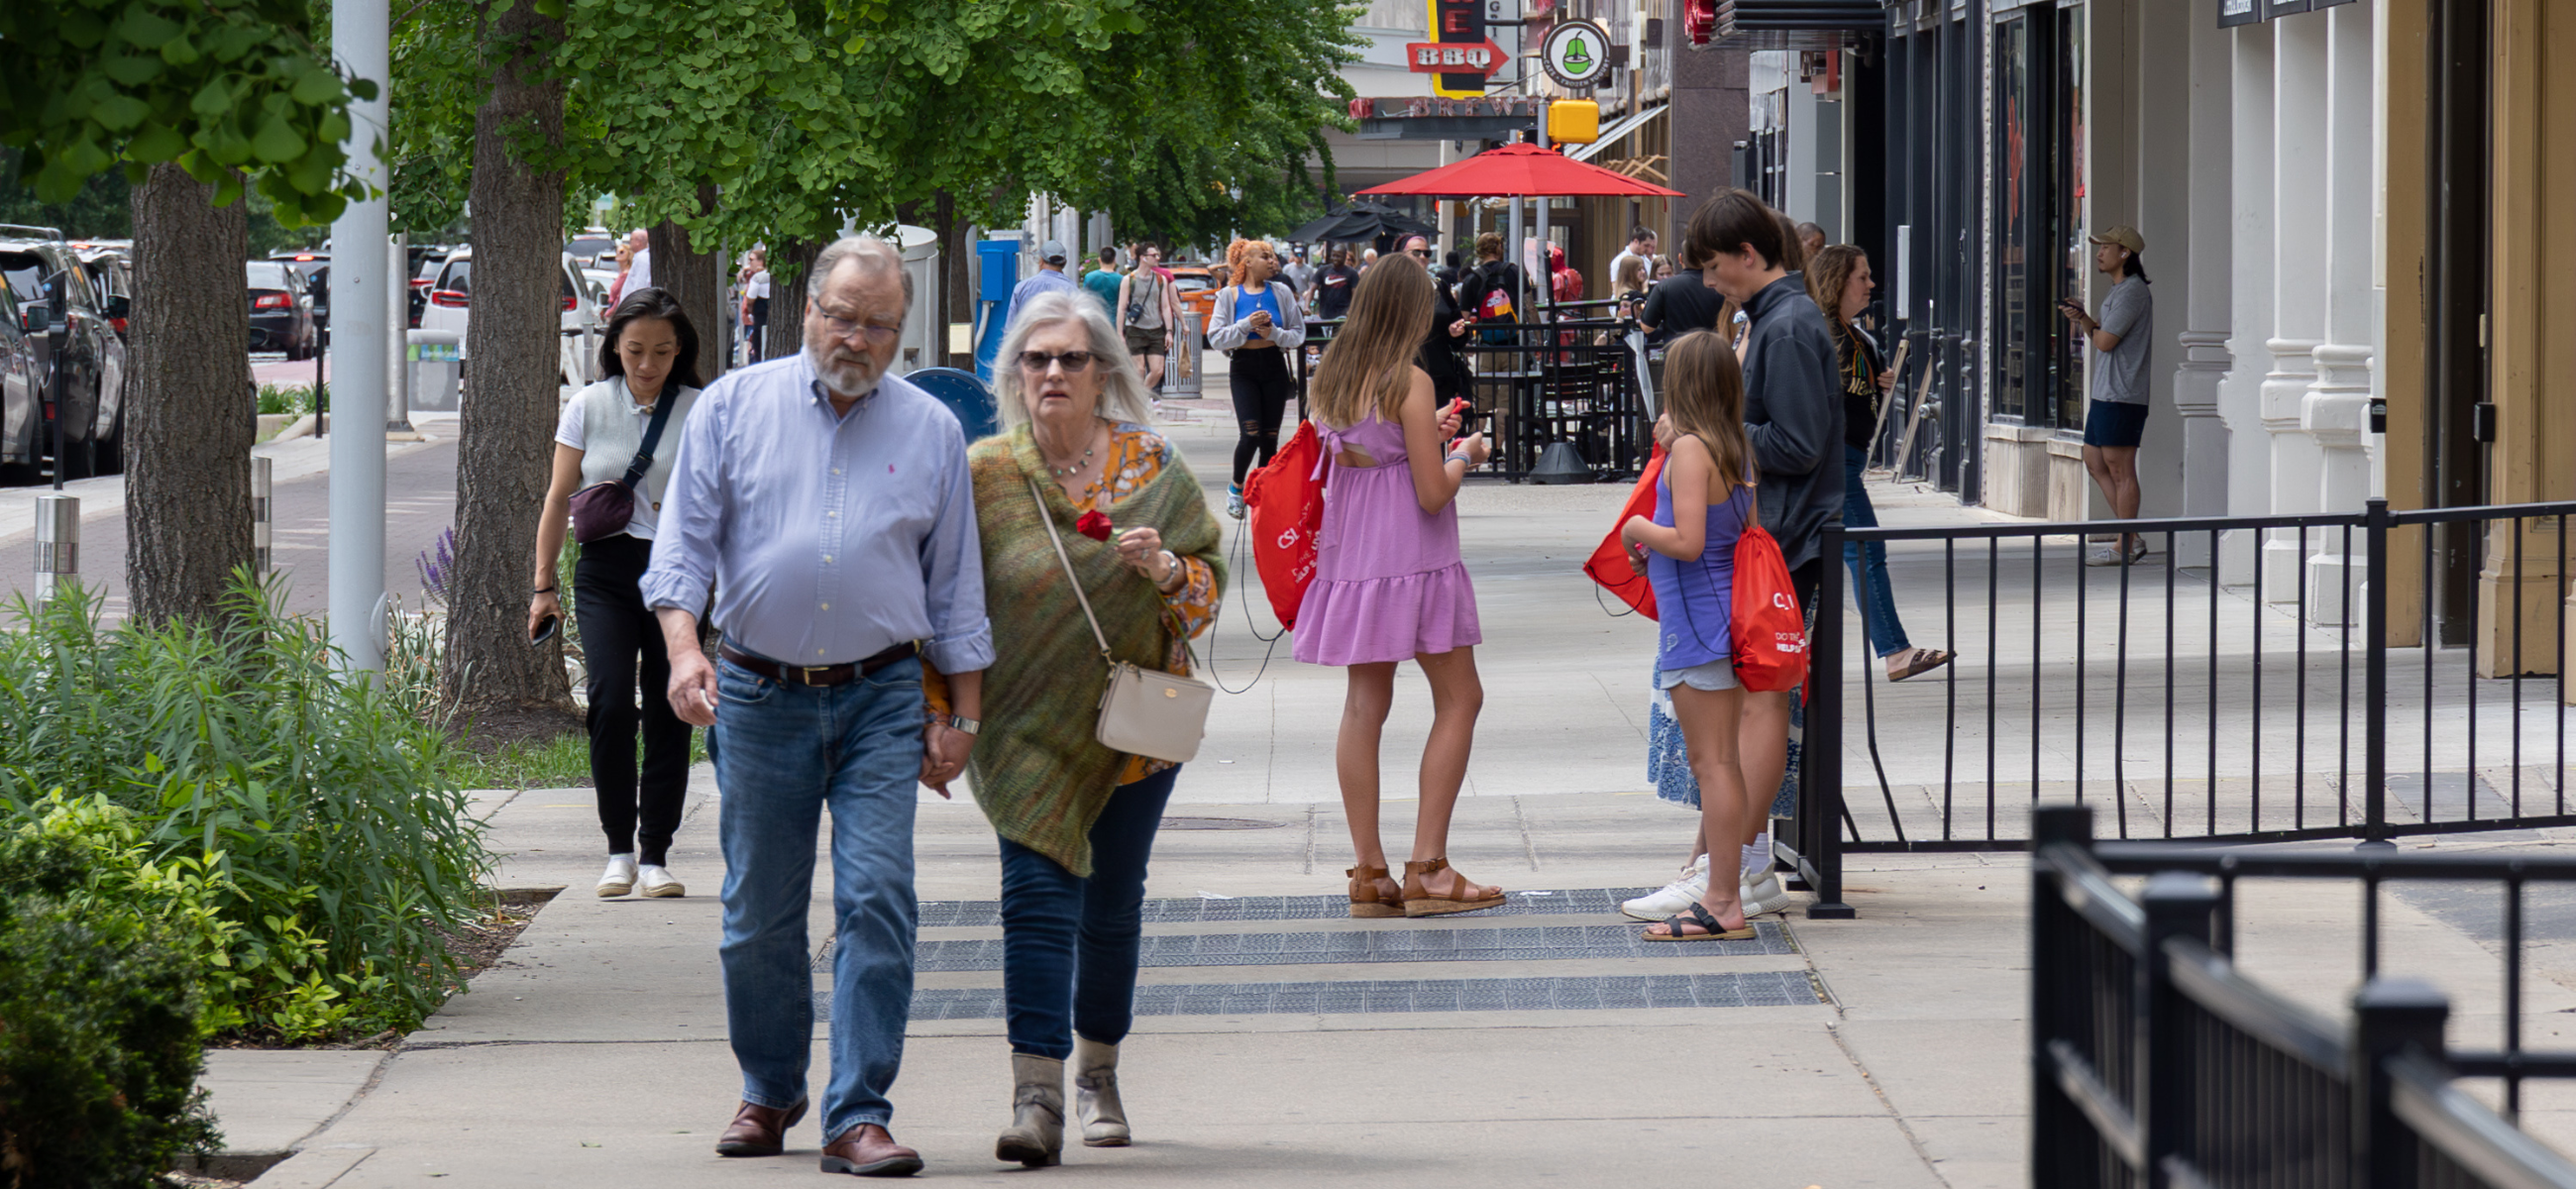 Residents fill the sidewalk on a warm spring day in downtown Indianapolis. (Credit: Mark Curry)